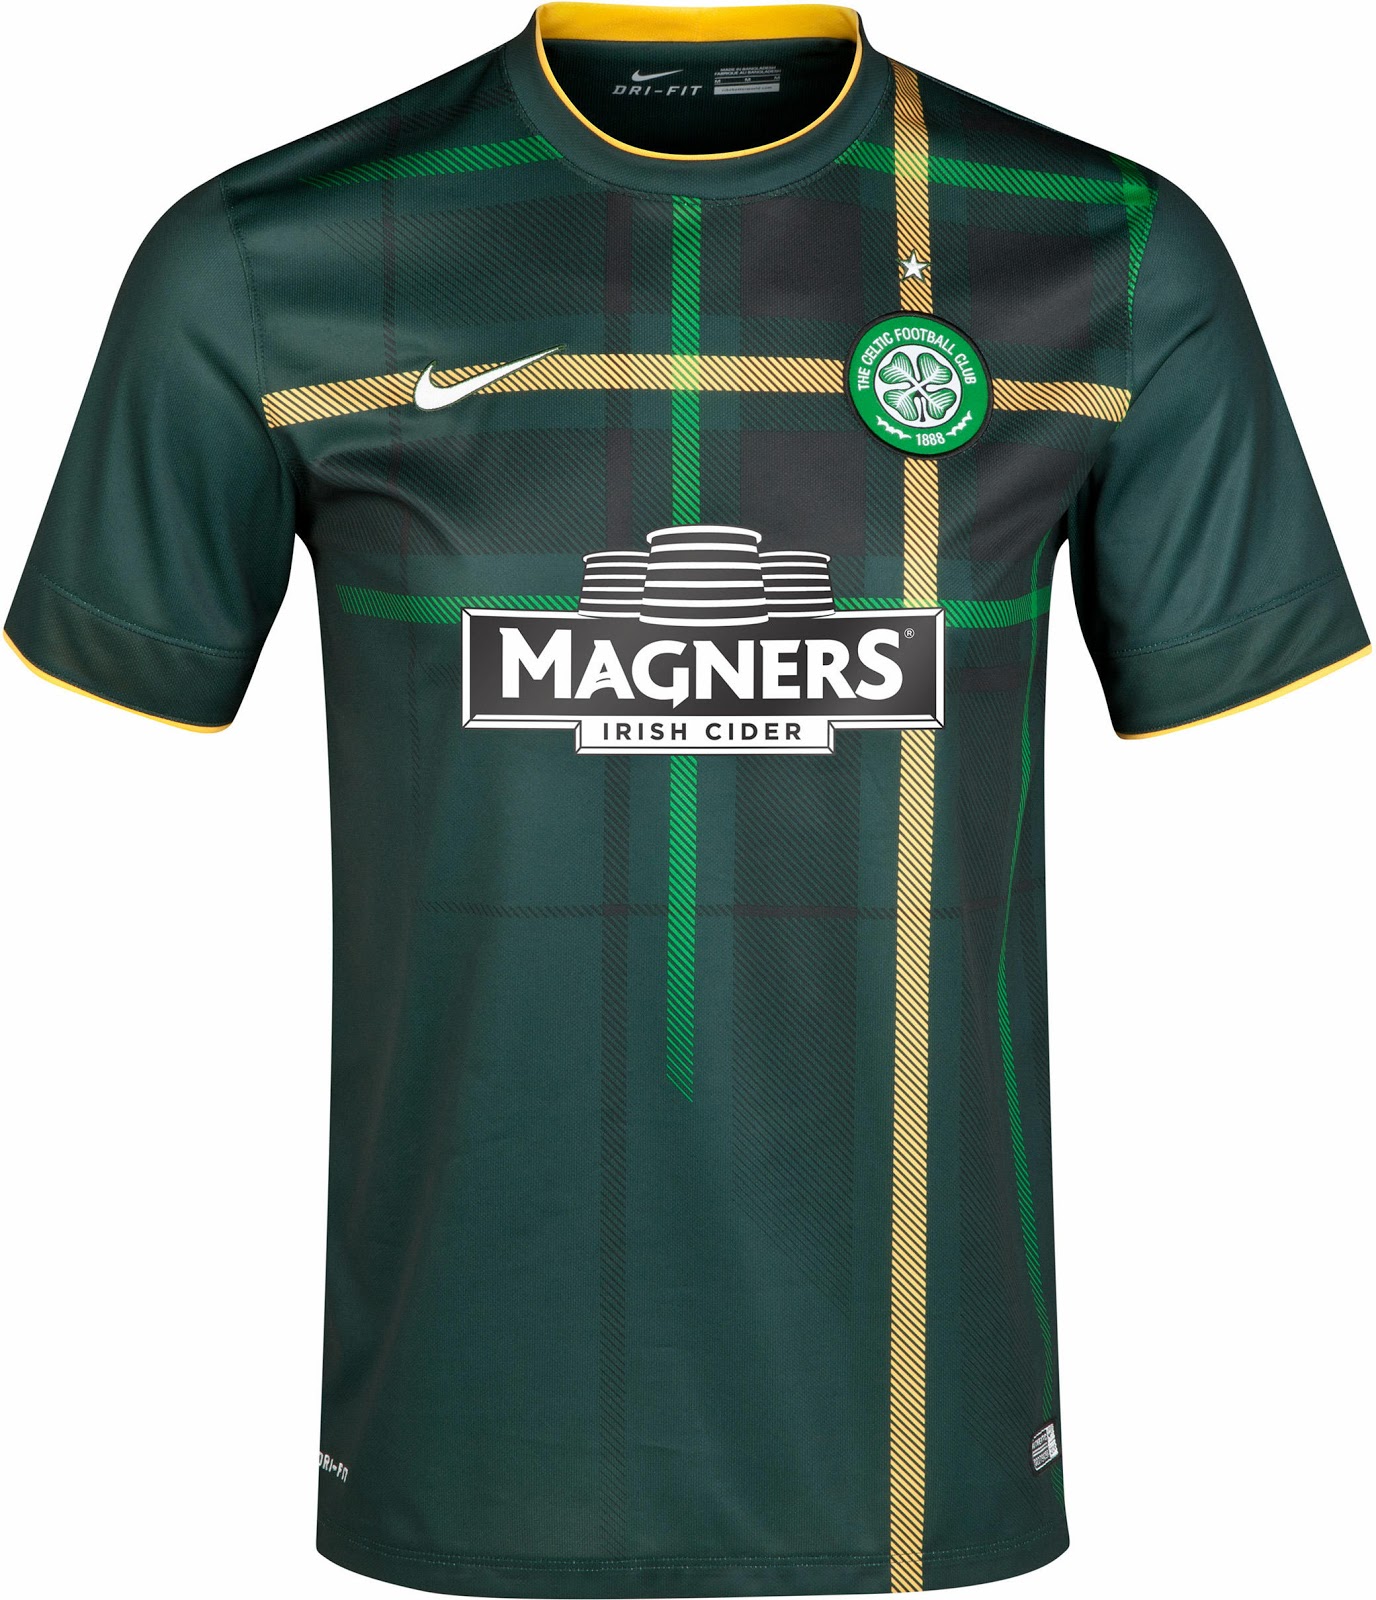 New Nike Celtic 14-15 Away and Third Kits - Footy Headlines